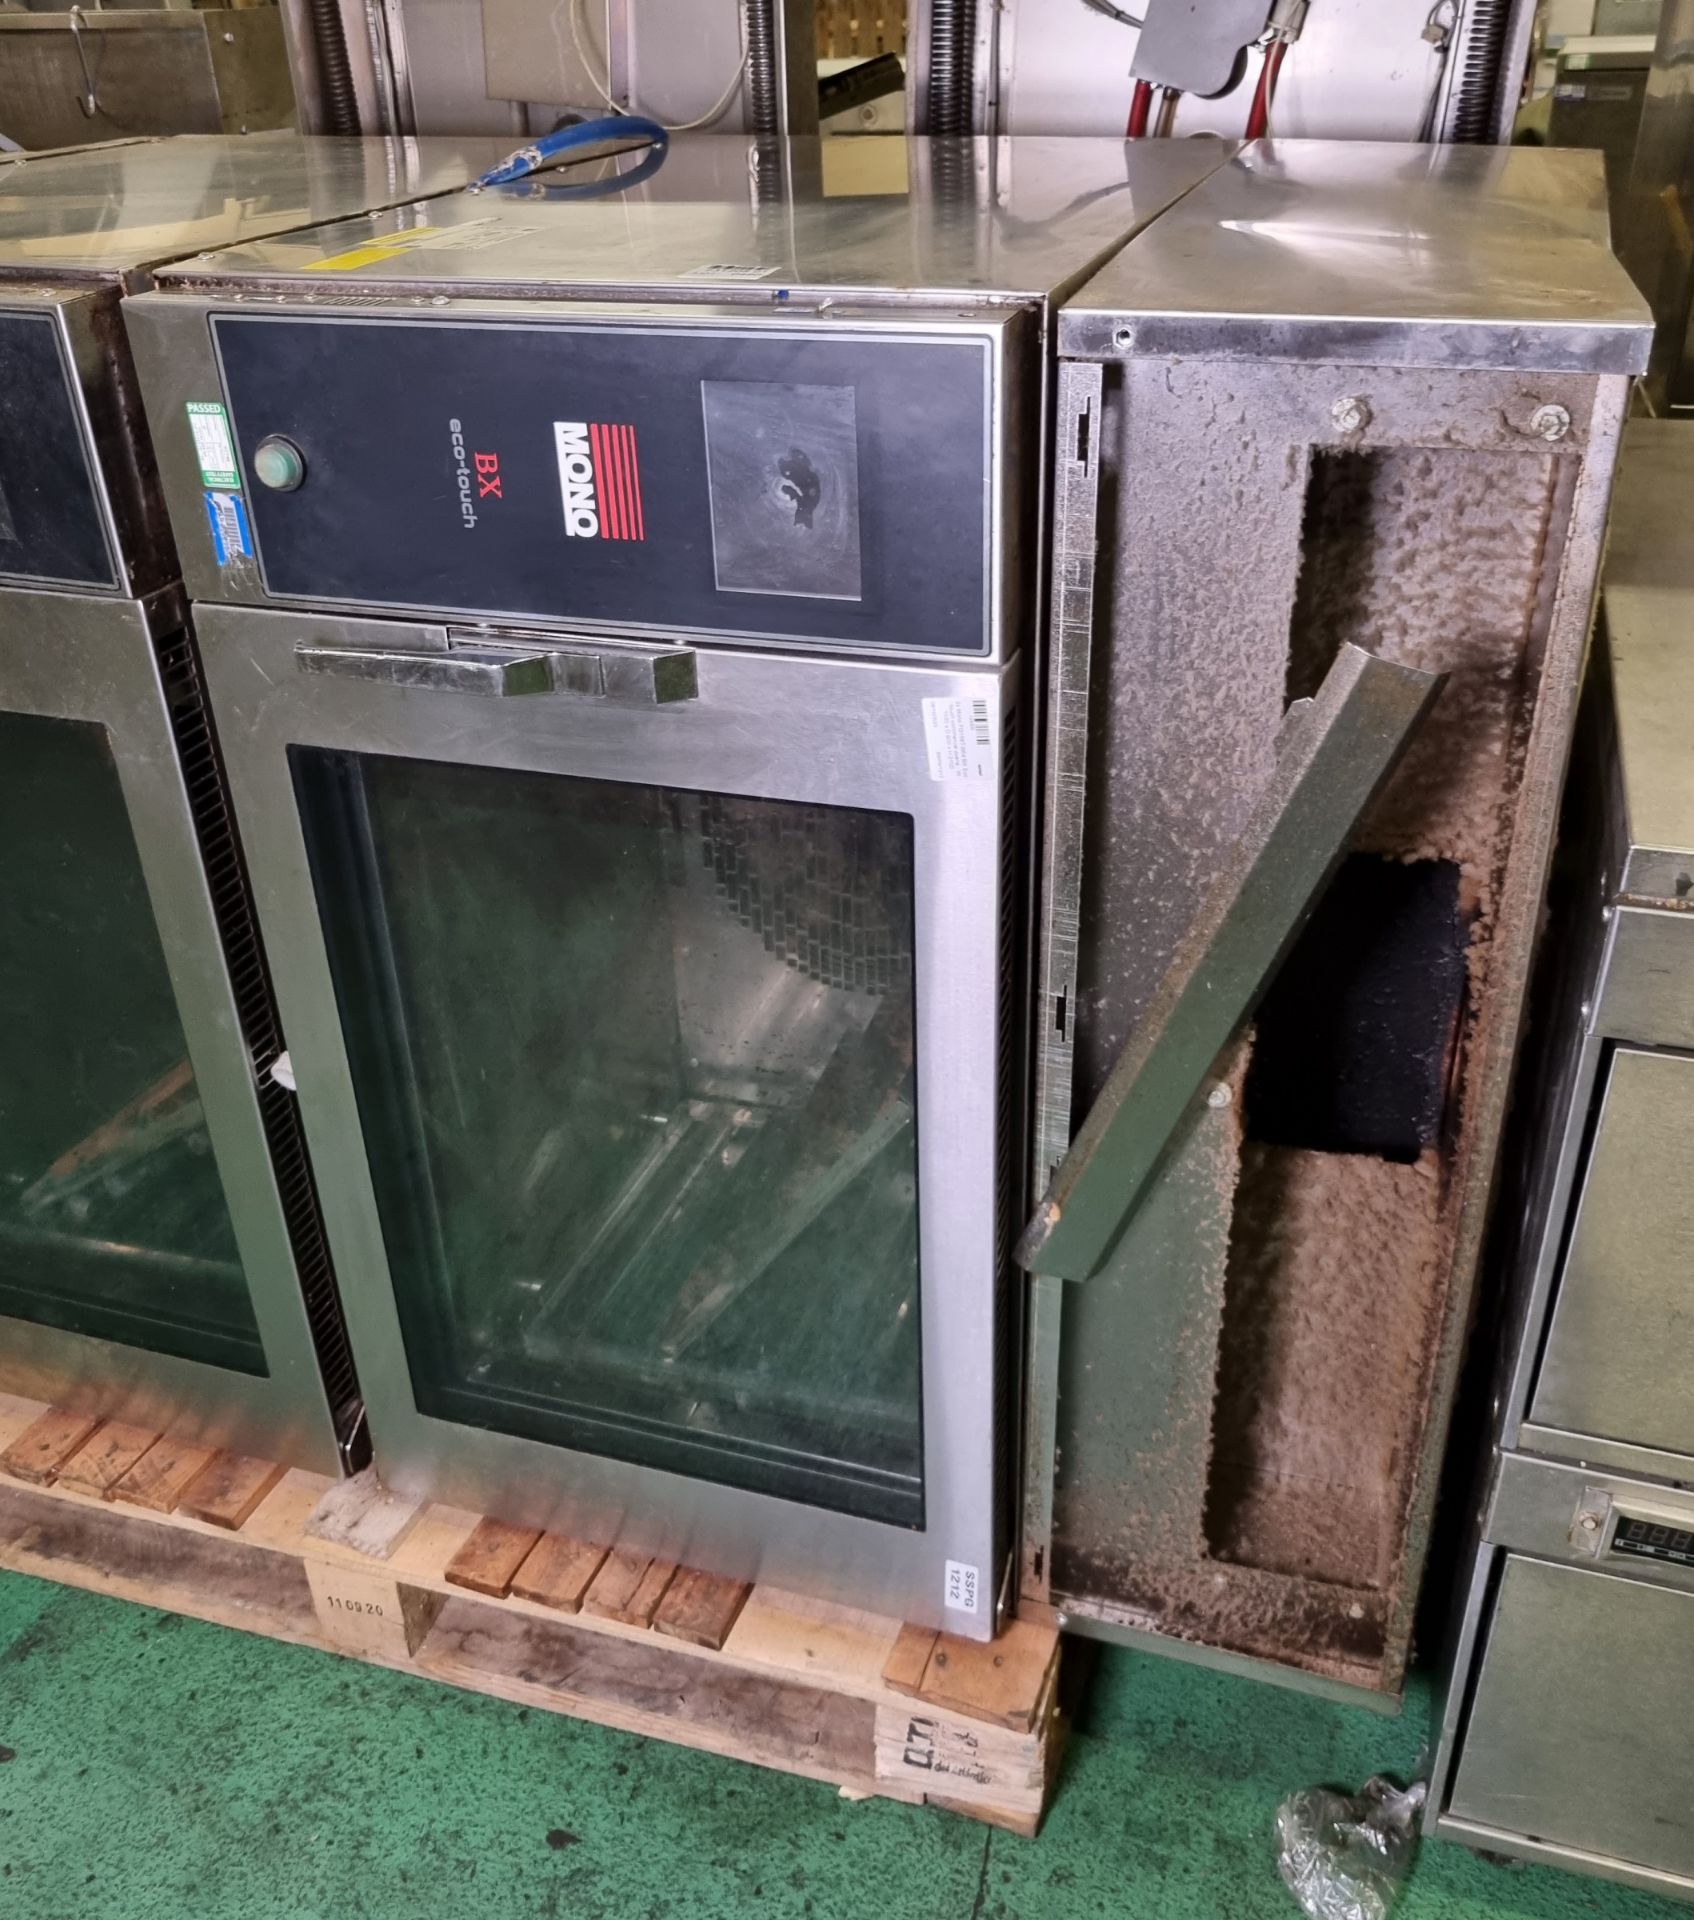 2x Mono FG158T-B54 BX Eco-touch commercial ovens - W 1020 x D 900 x H 2100 - Image 3 of 8